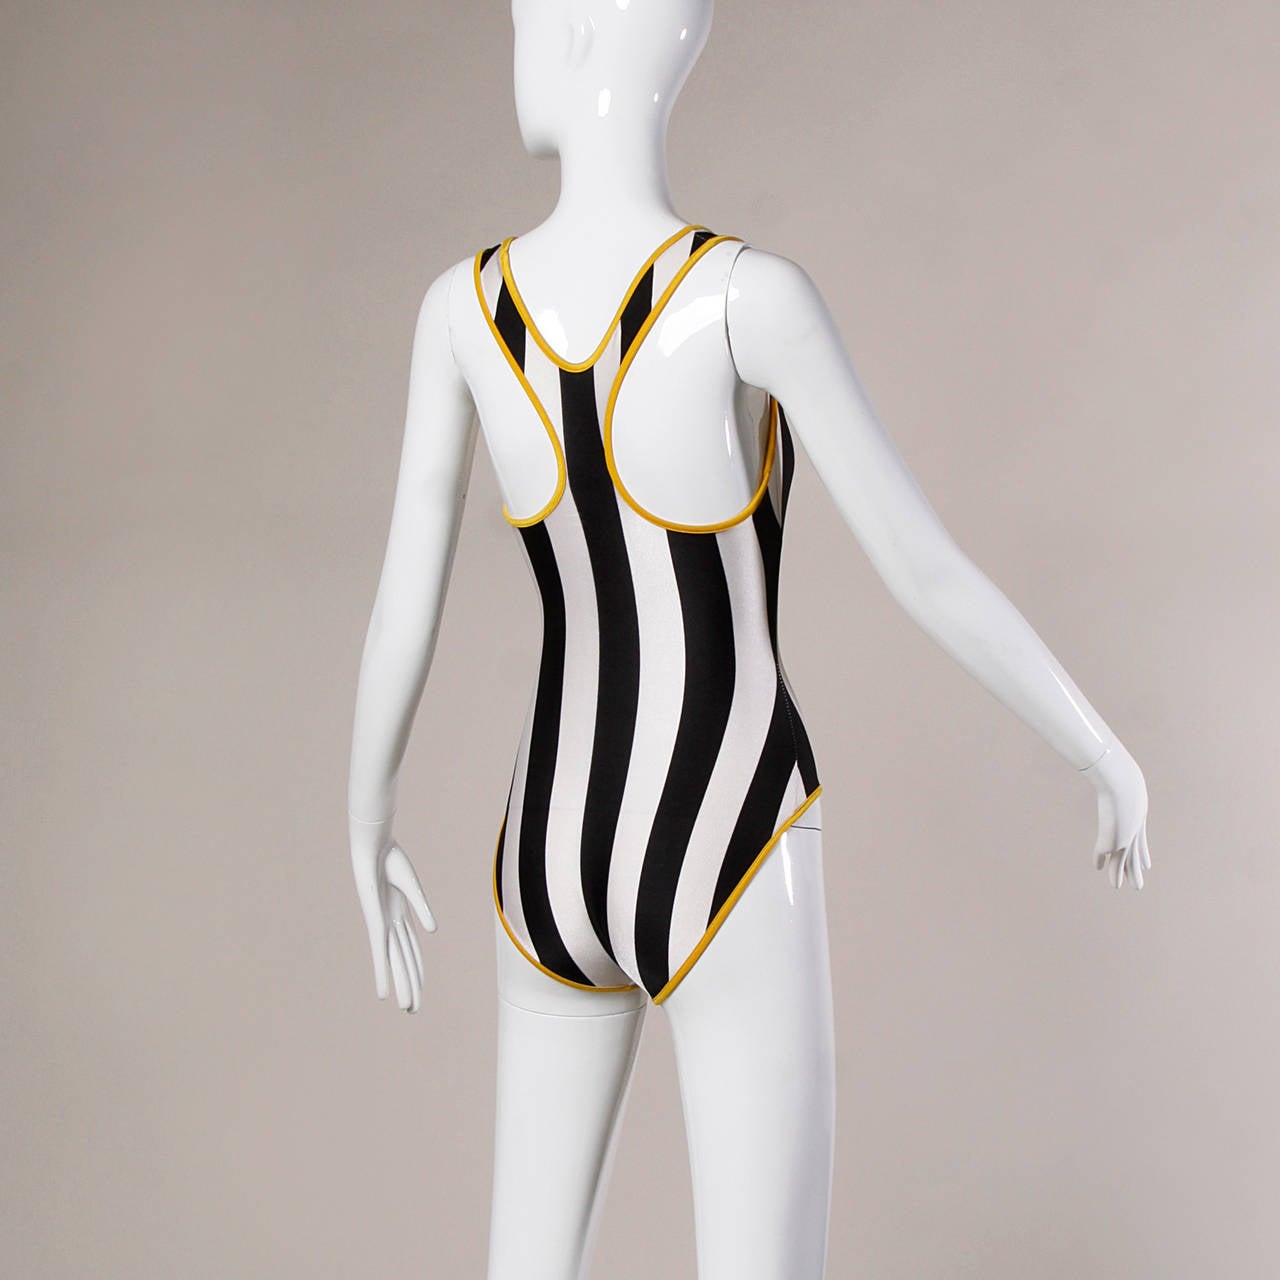 1996 Iconic OMO Norma Kamali Body Suit as Worn in the Movie Clueless 1